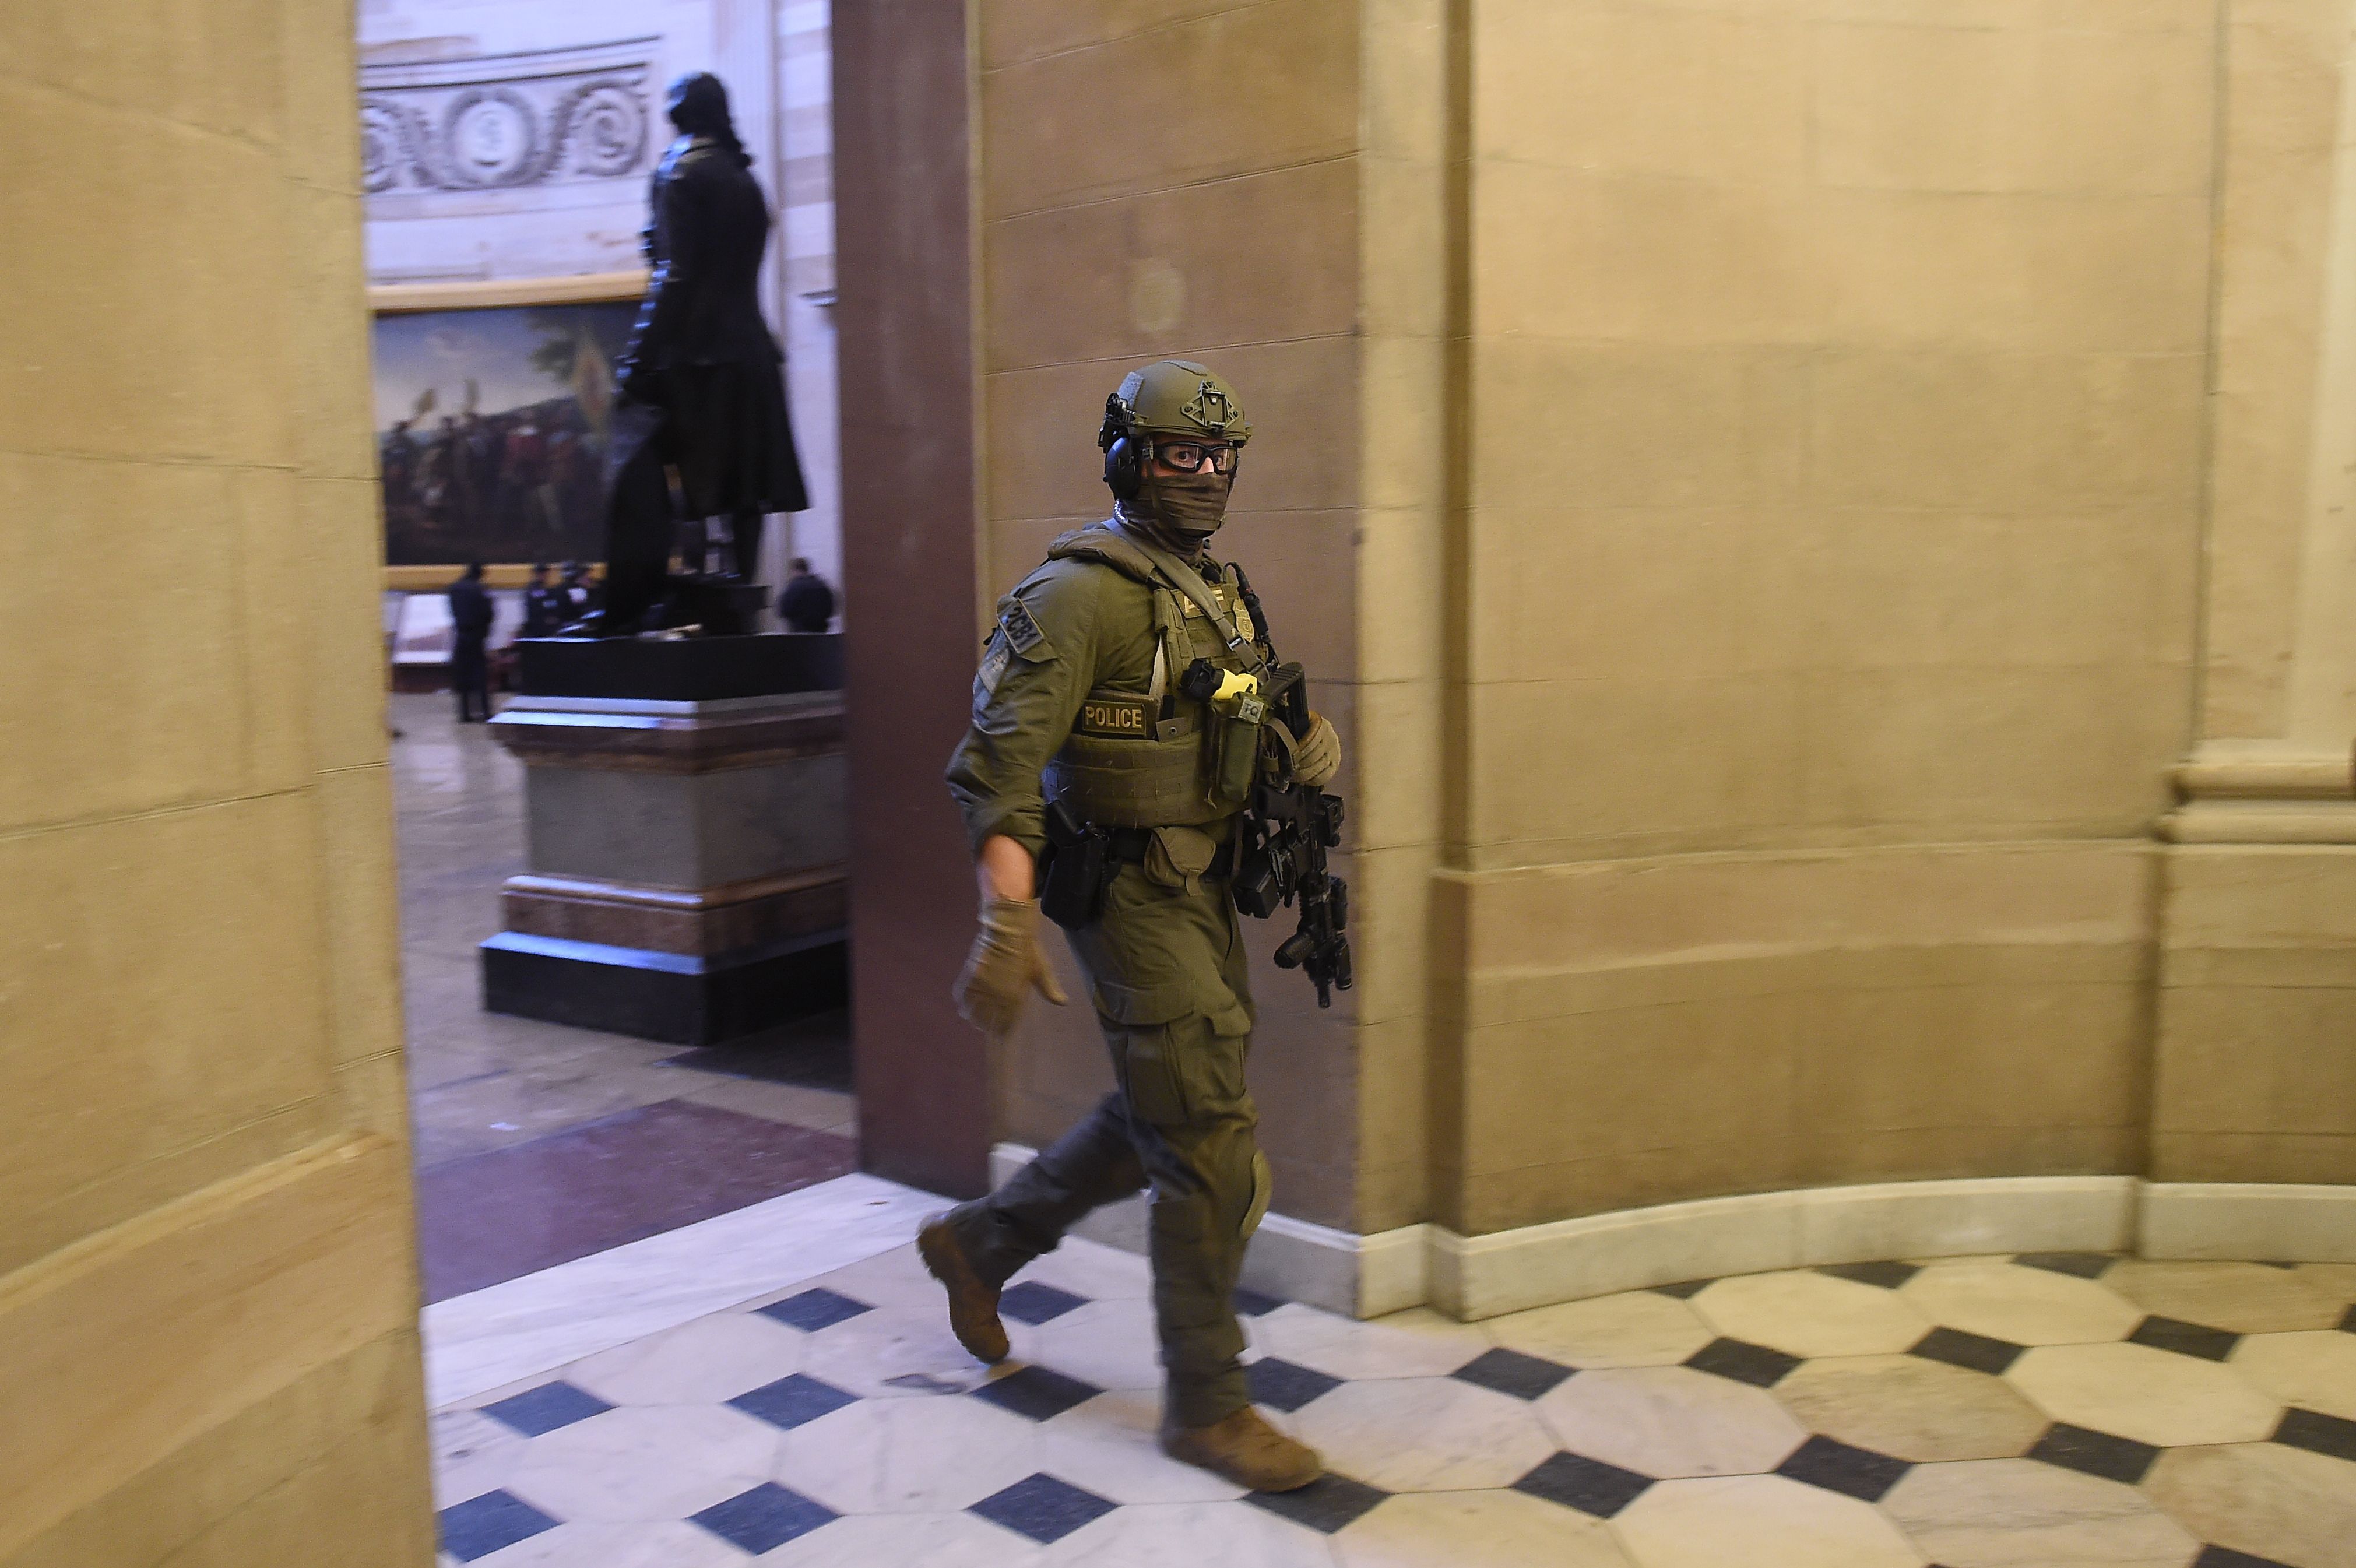 A law enforcement officer in tactical gear is seen walking through the U.S. Capitol.